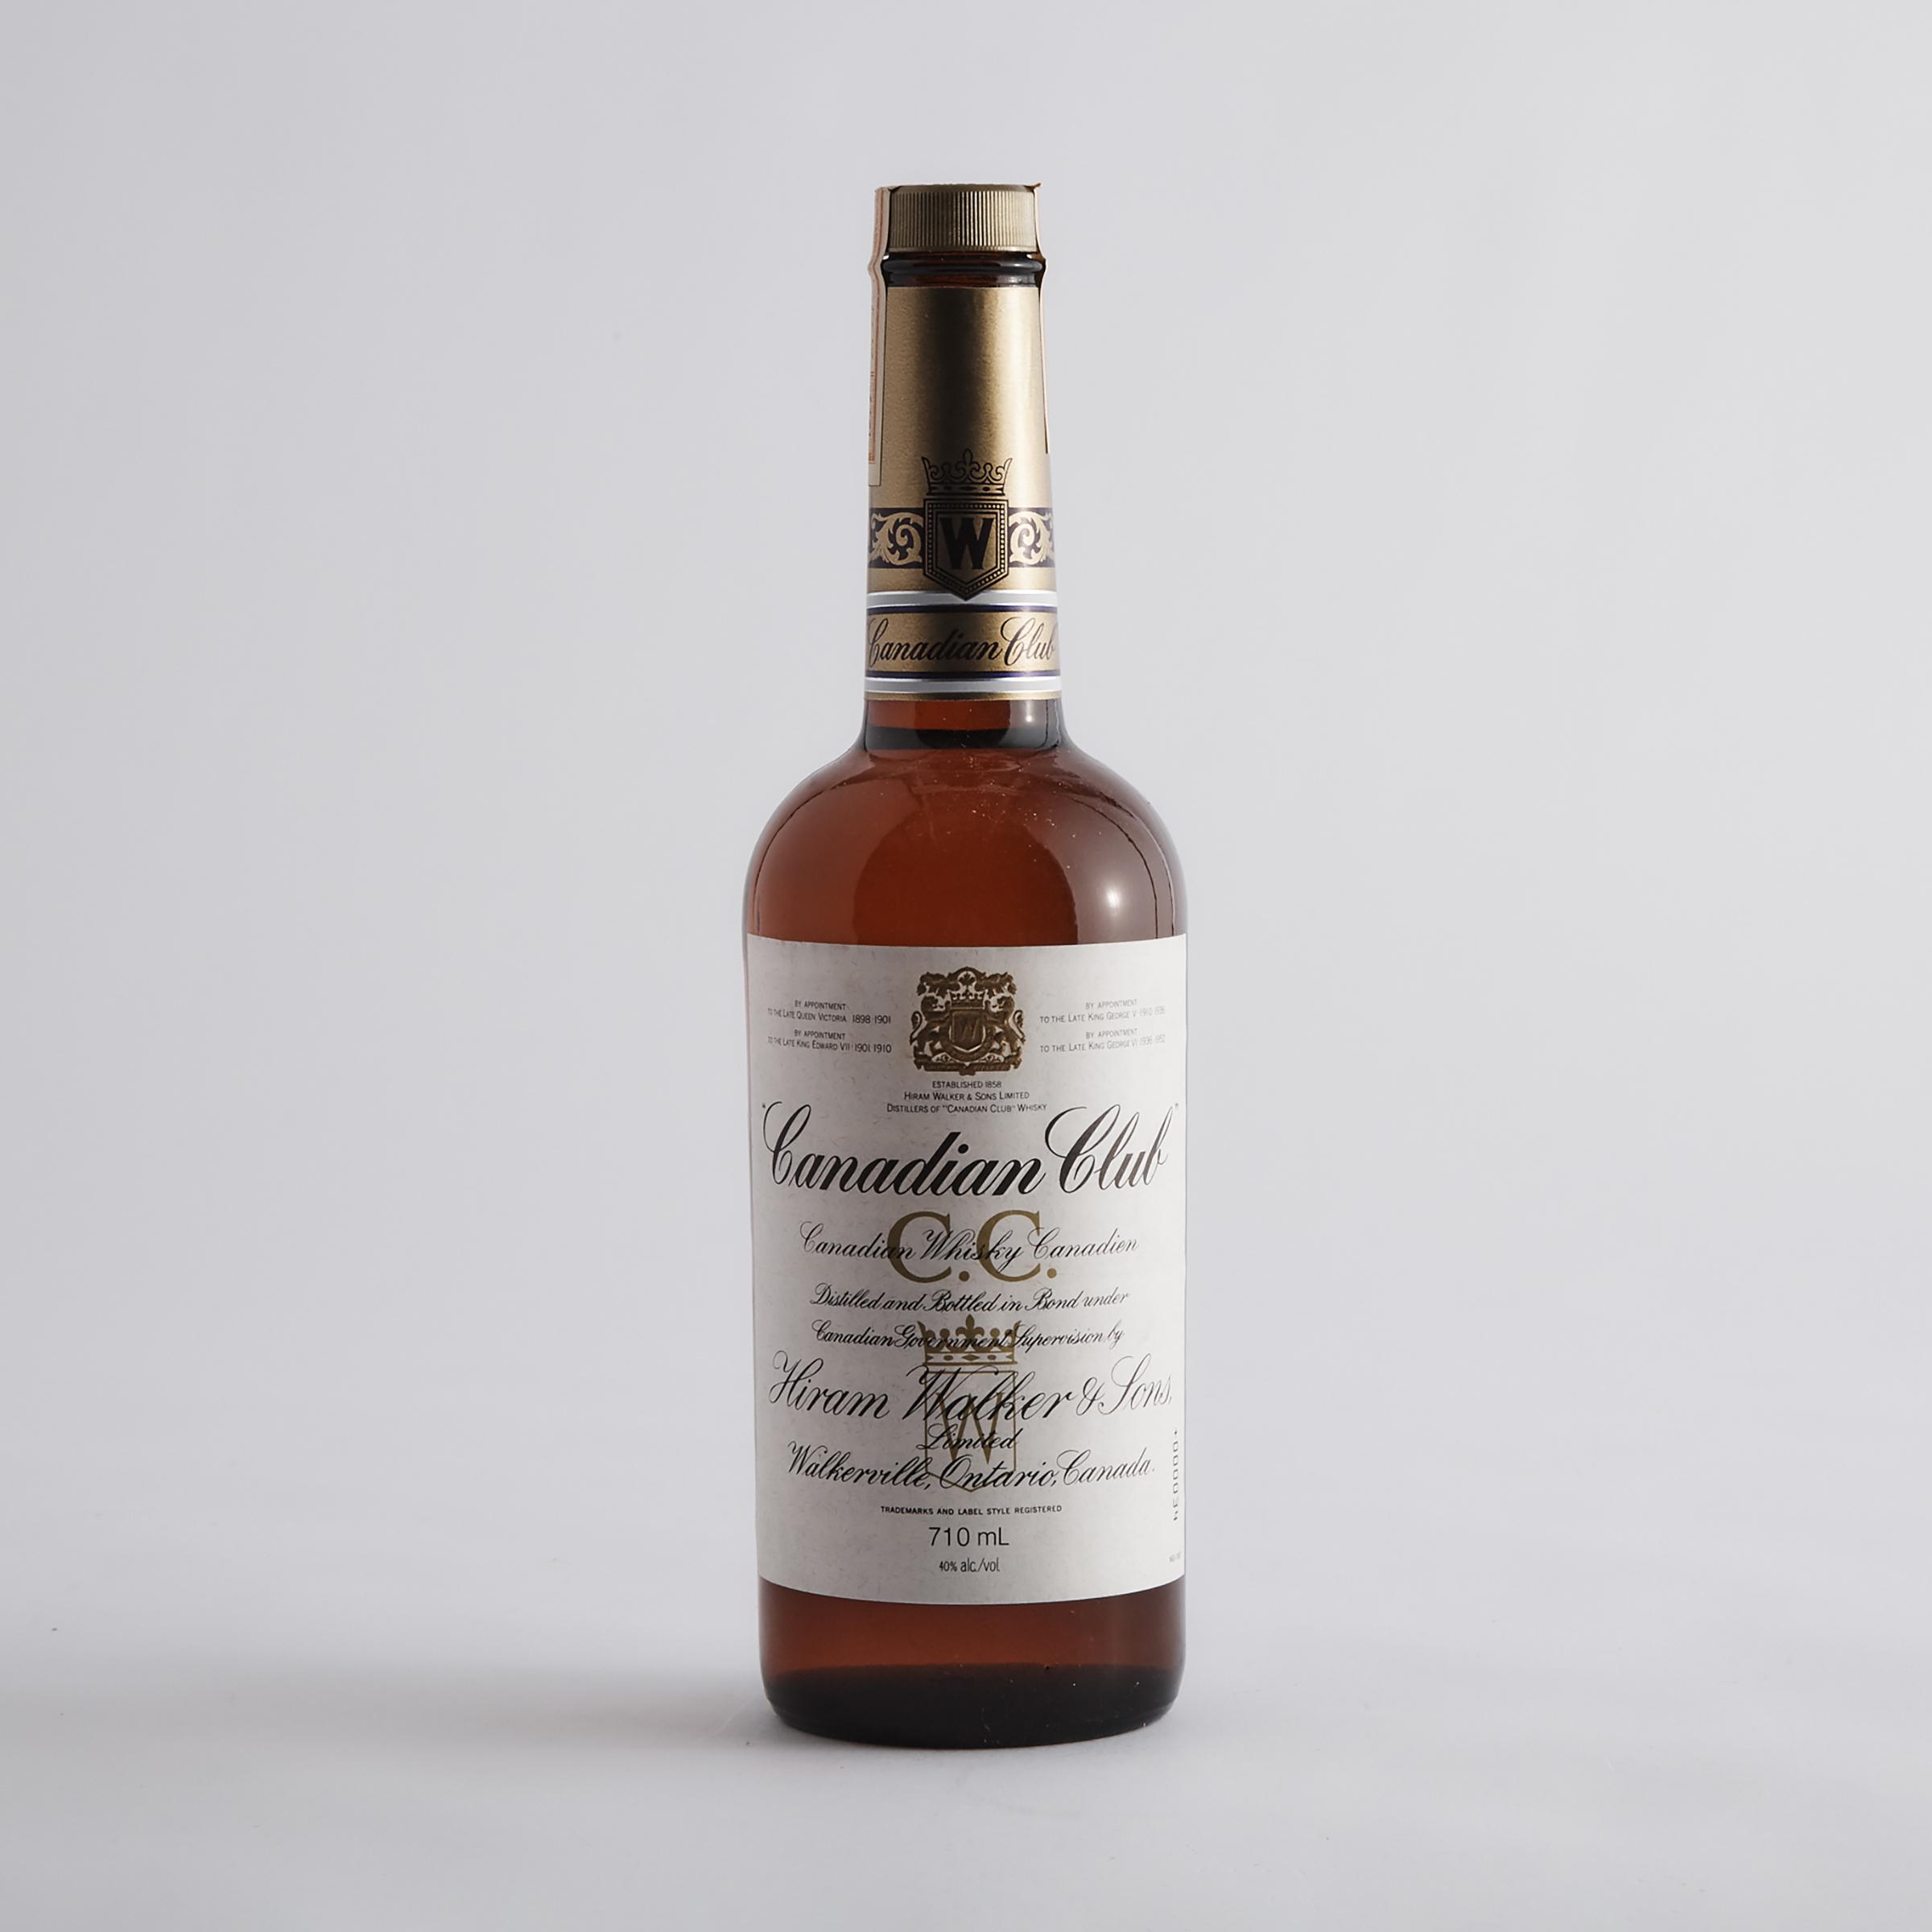 CANADIAN CLUB CANADIAN WHISKY NAS (ONE 710 ML)